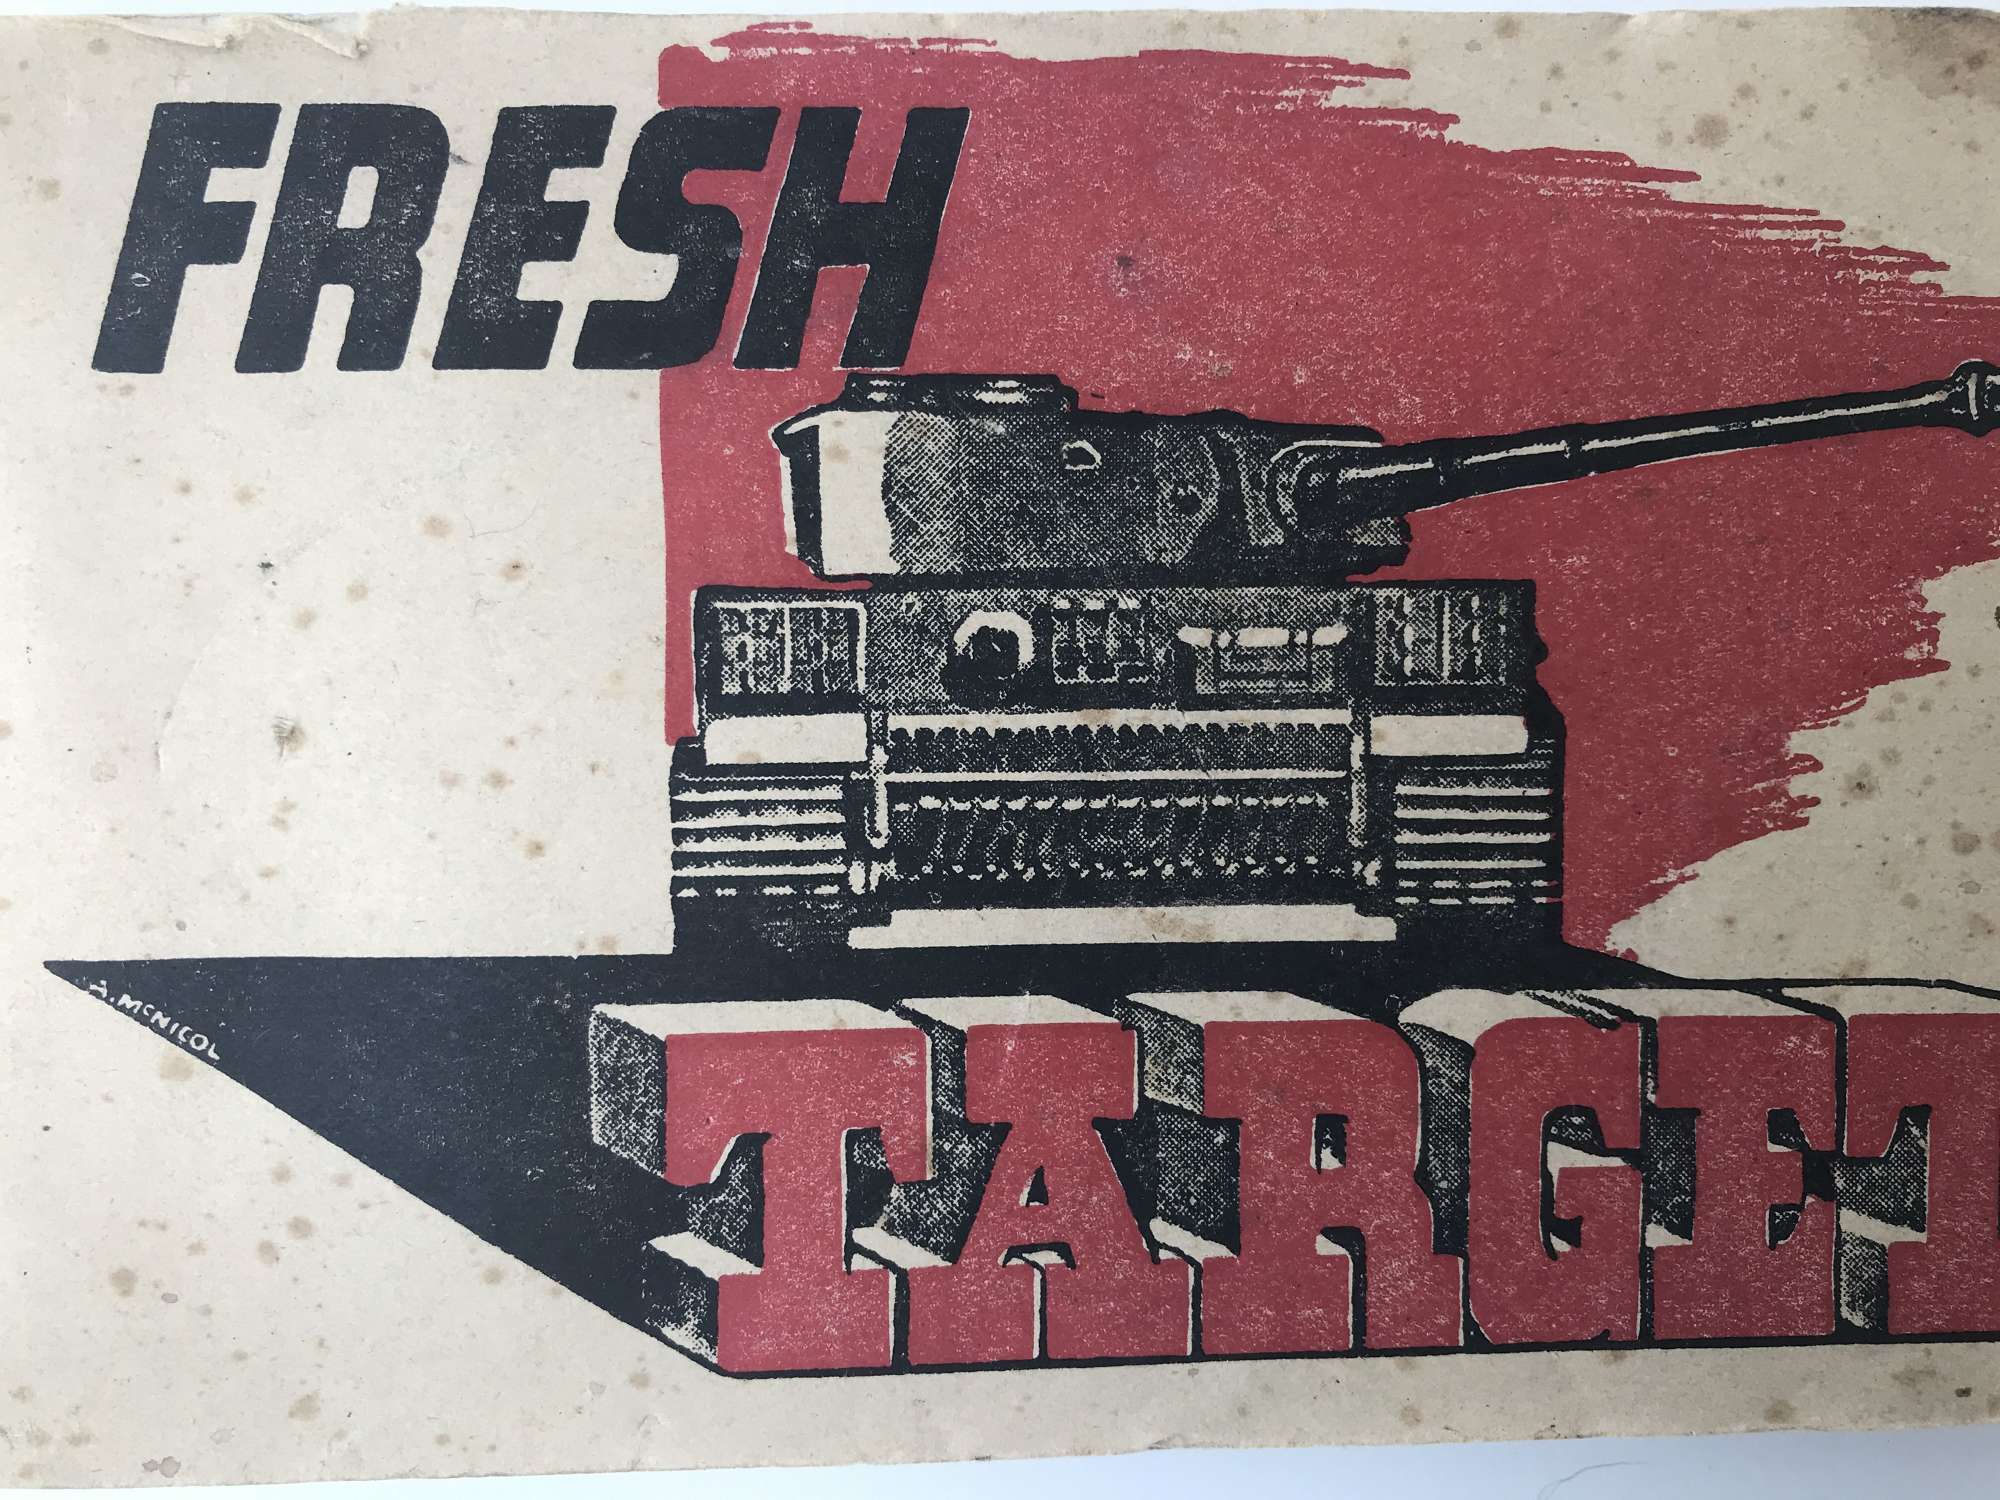 (Fresh target) British army booklet on axis equipment dated 1943